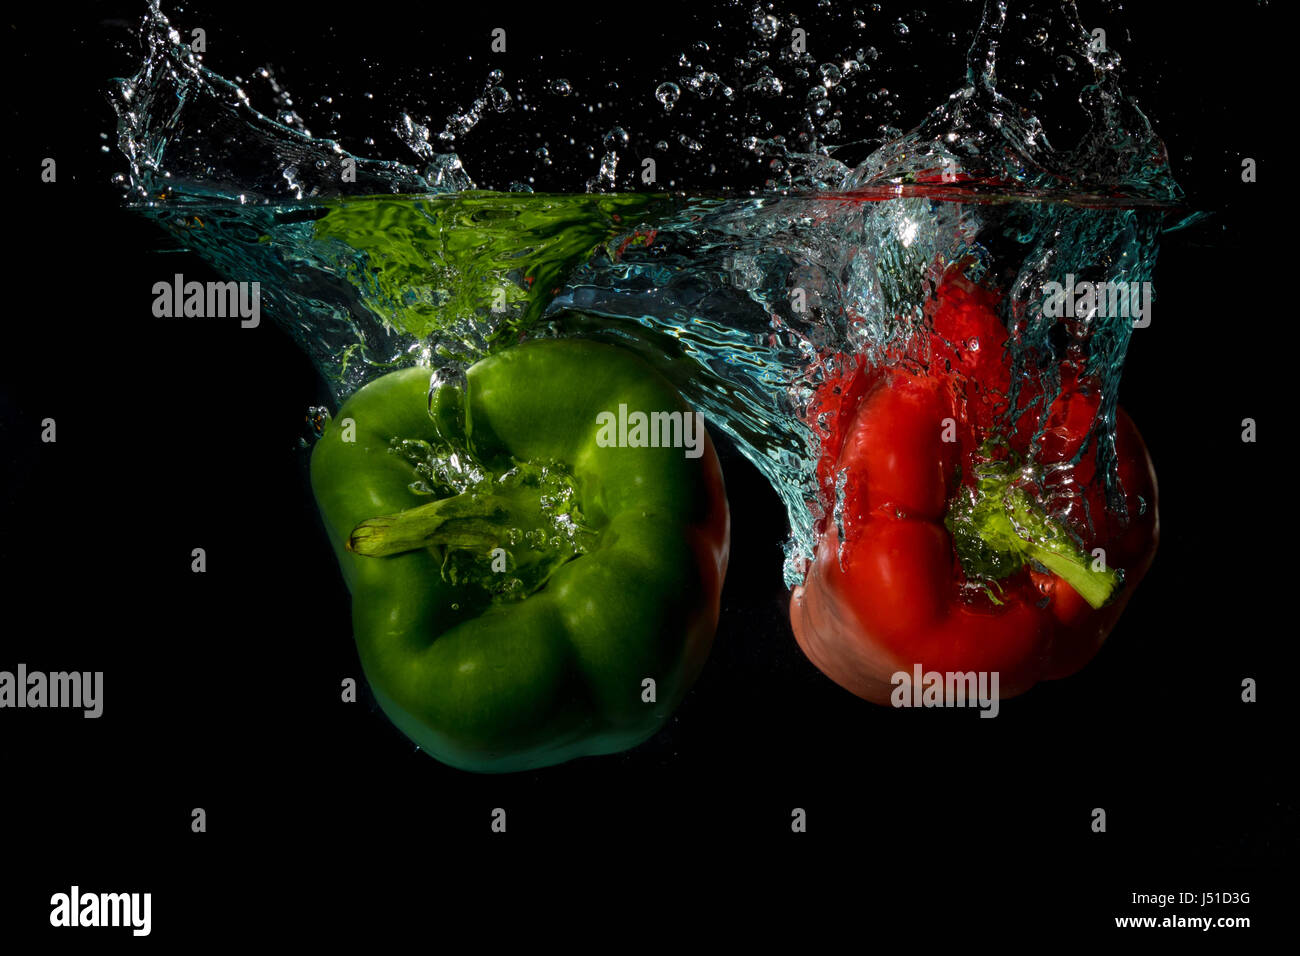 Green & Red Bell Sweet Peppers Droped Into Water Stock Photo